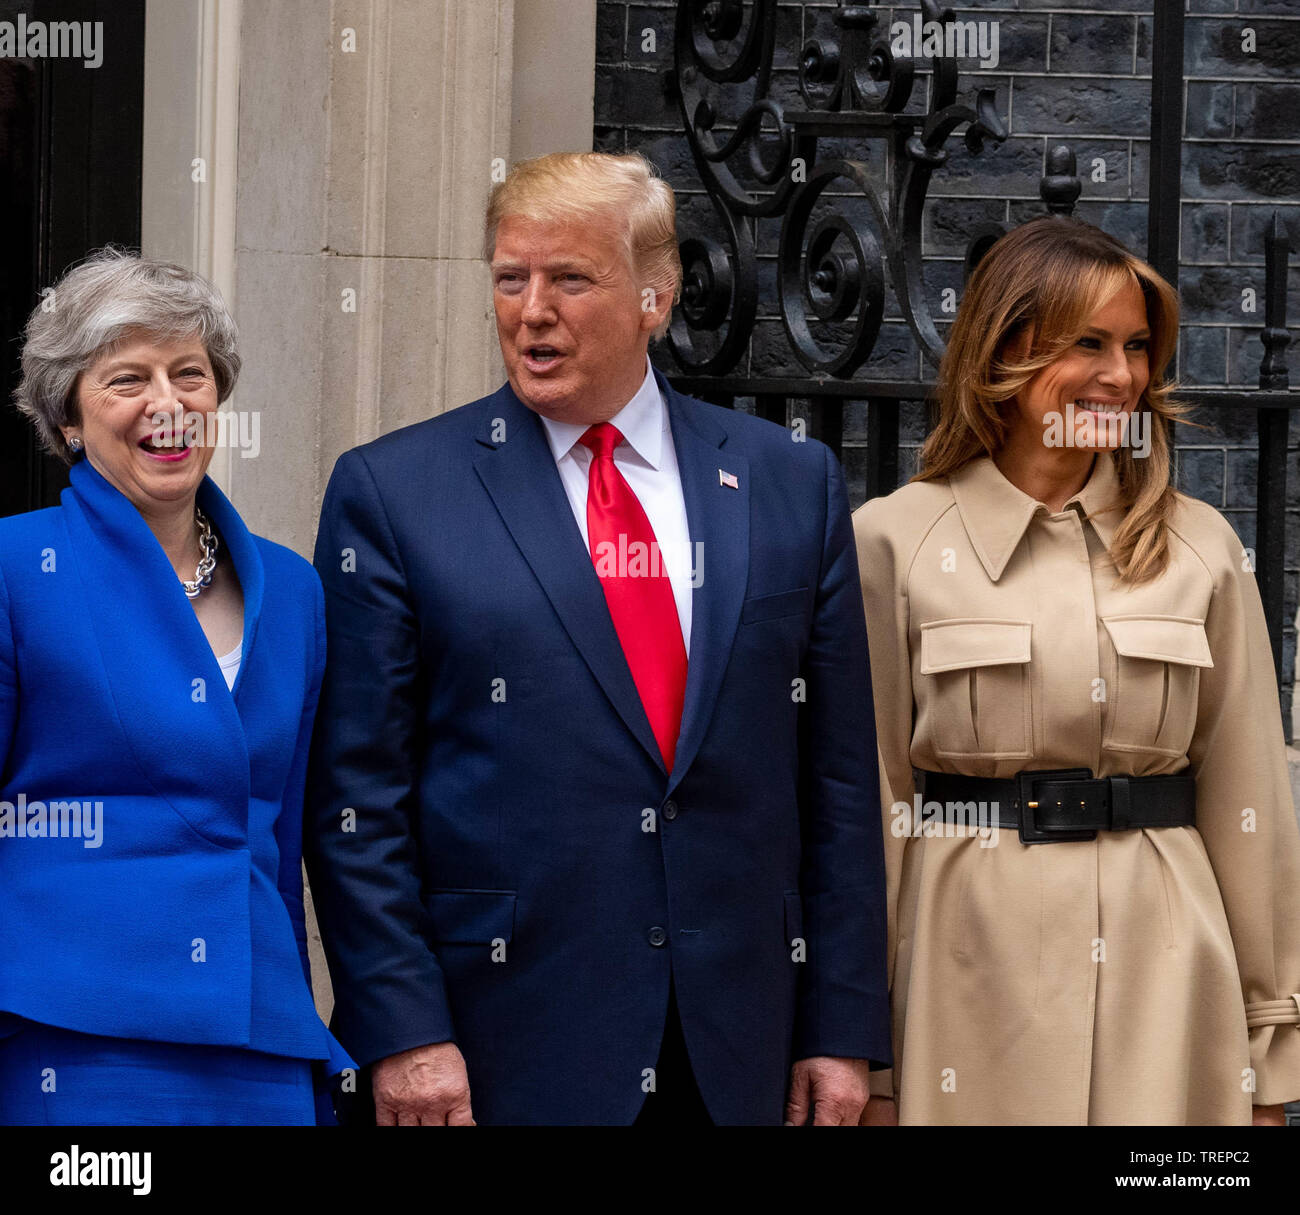 London 4th June 2019 President Donald Trump visits Theresa May MP PC, Prime Minister in Dowing Street Credit: Ian Davidson/Alamy Live News Stock Photo